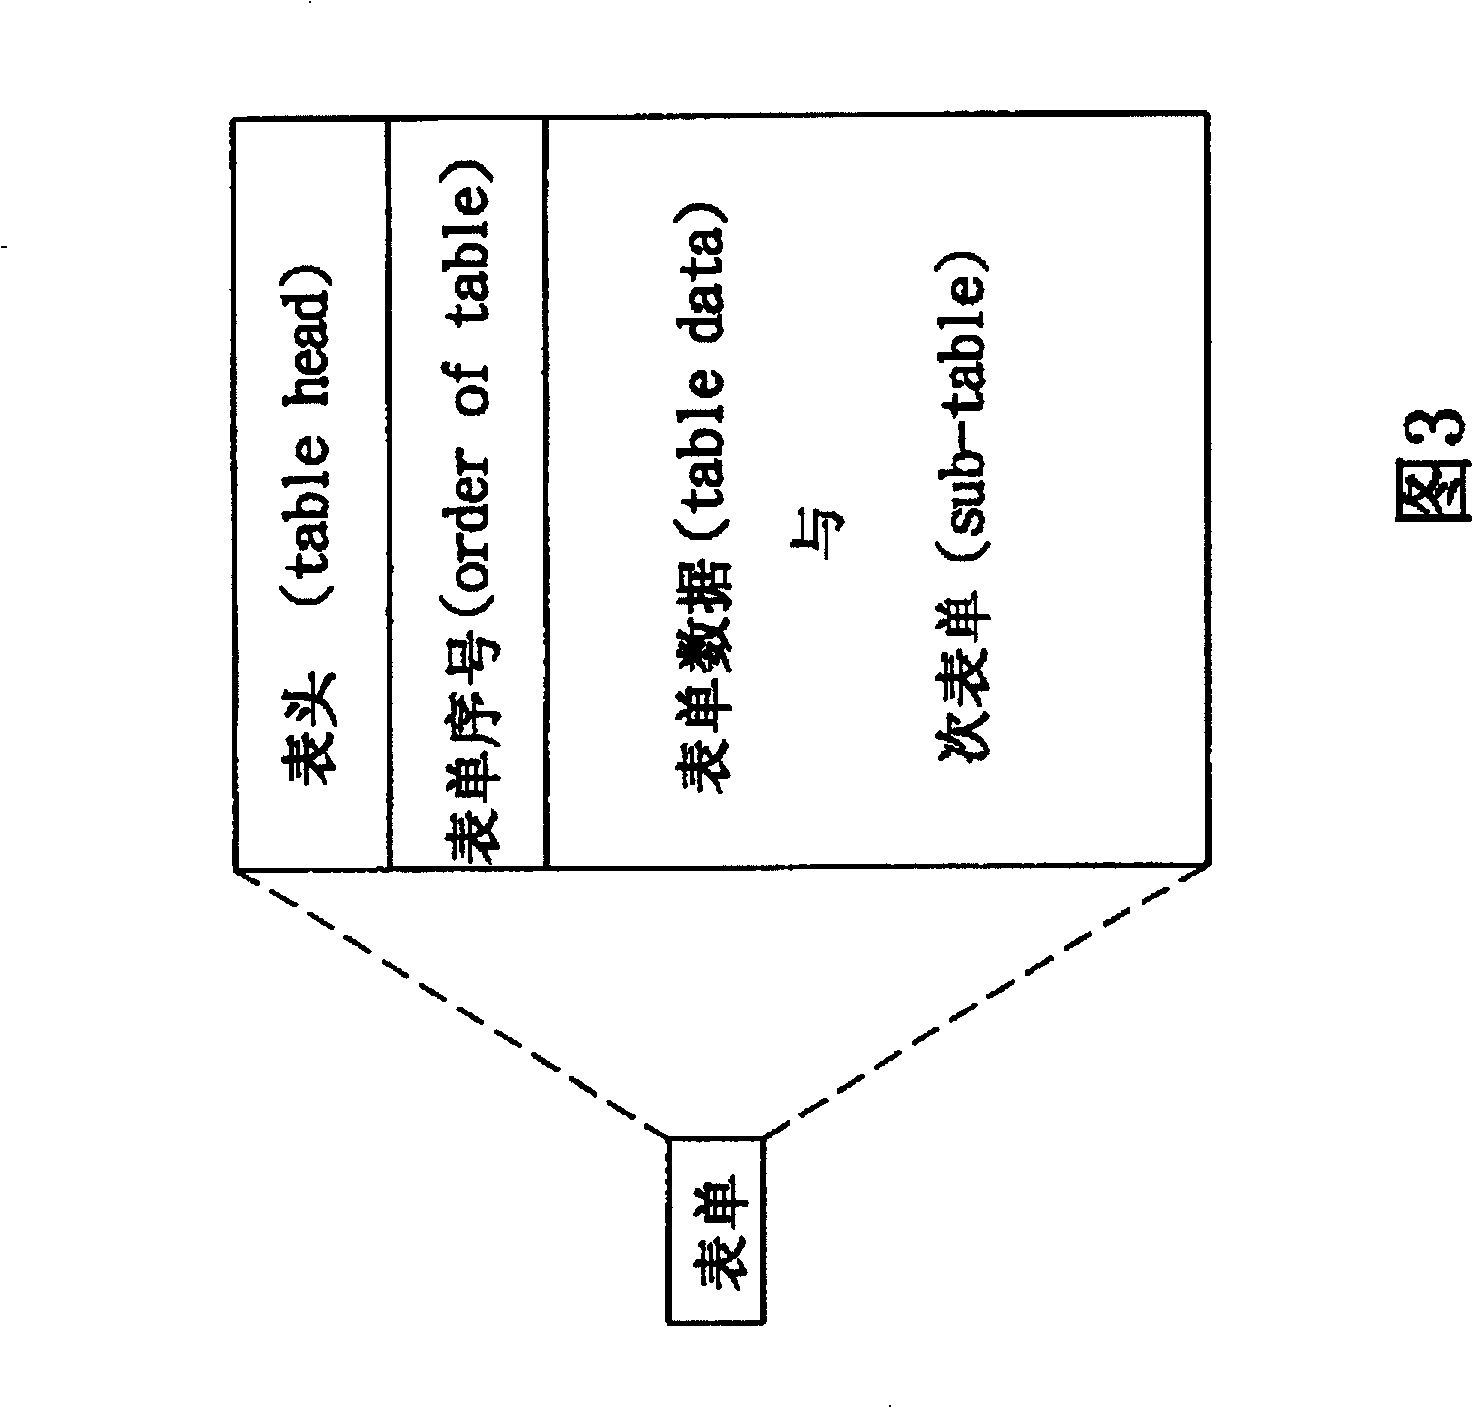 Audio and video disc data structure and operating method